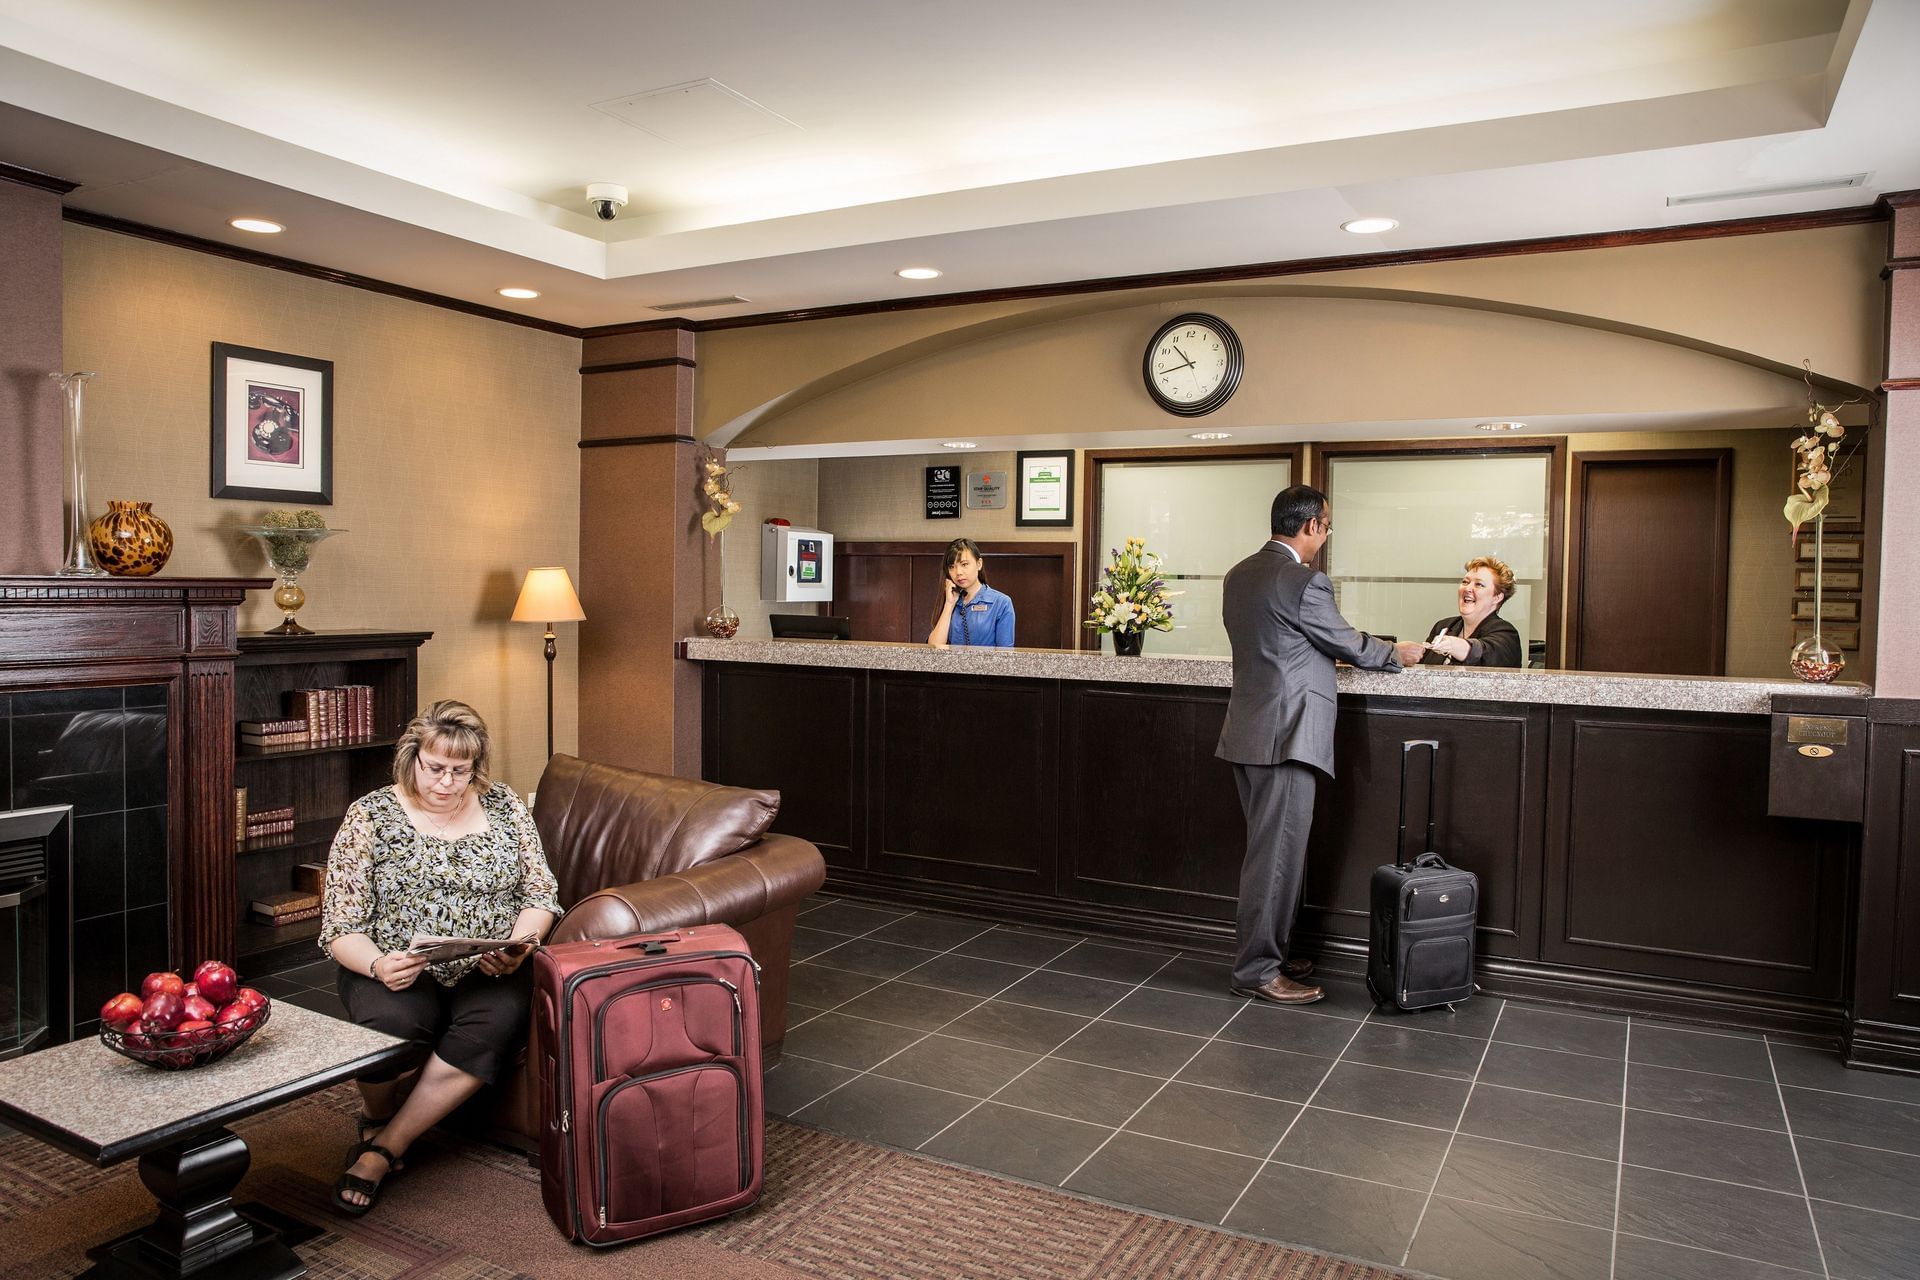 Woman sitting on leather couch and man checking in to hotel